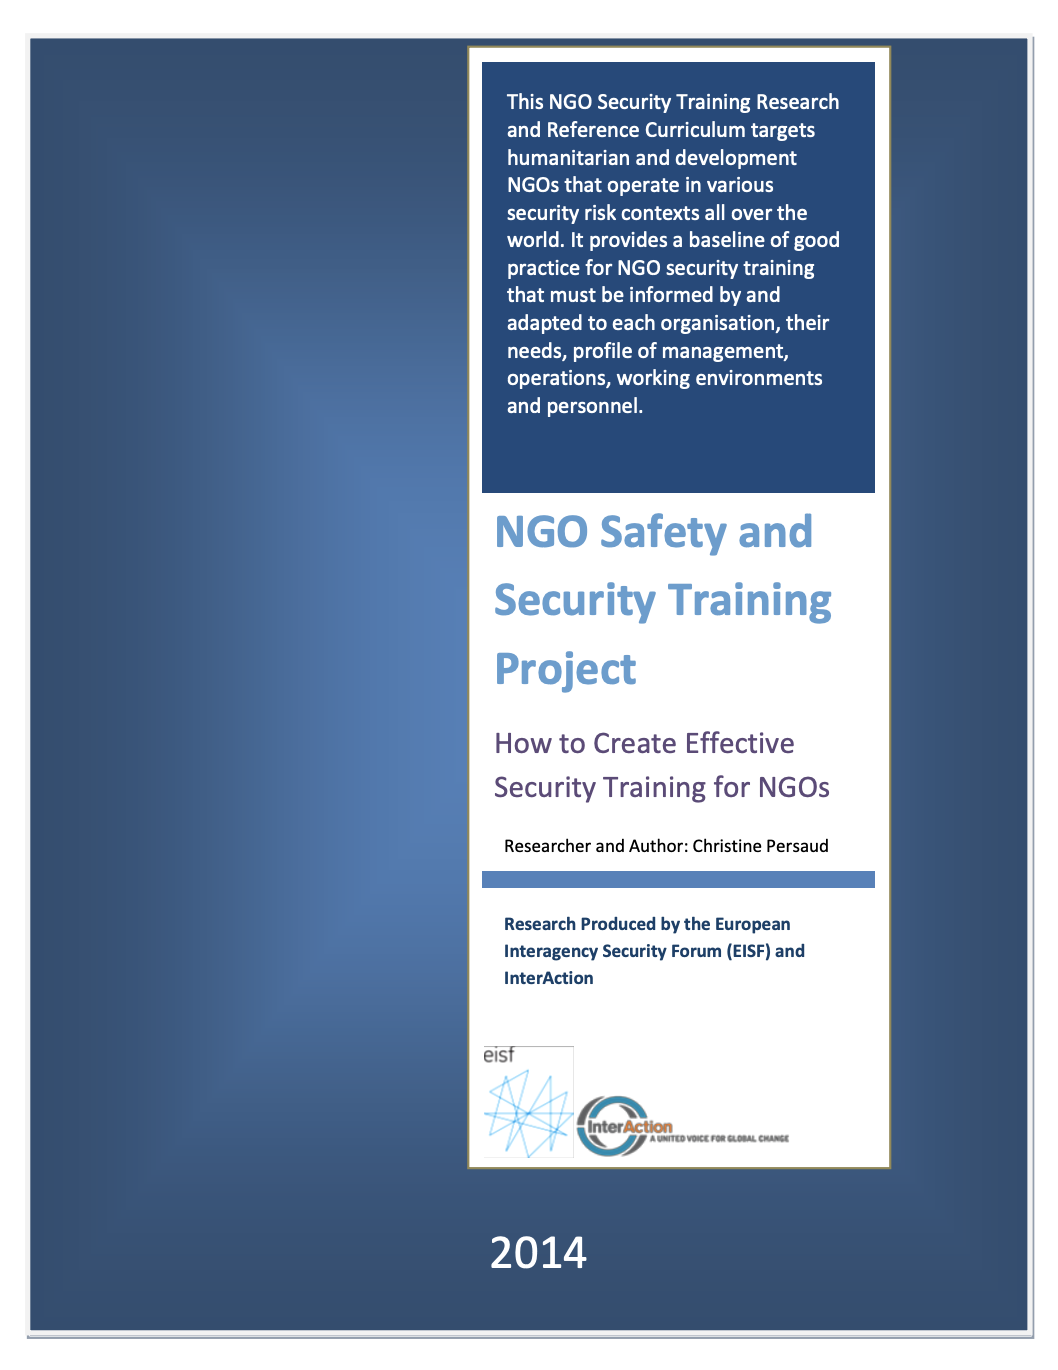 NGO Safety and Security Training Project: How to Create Effective Security Training for NGOs